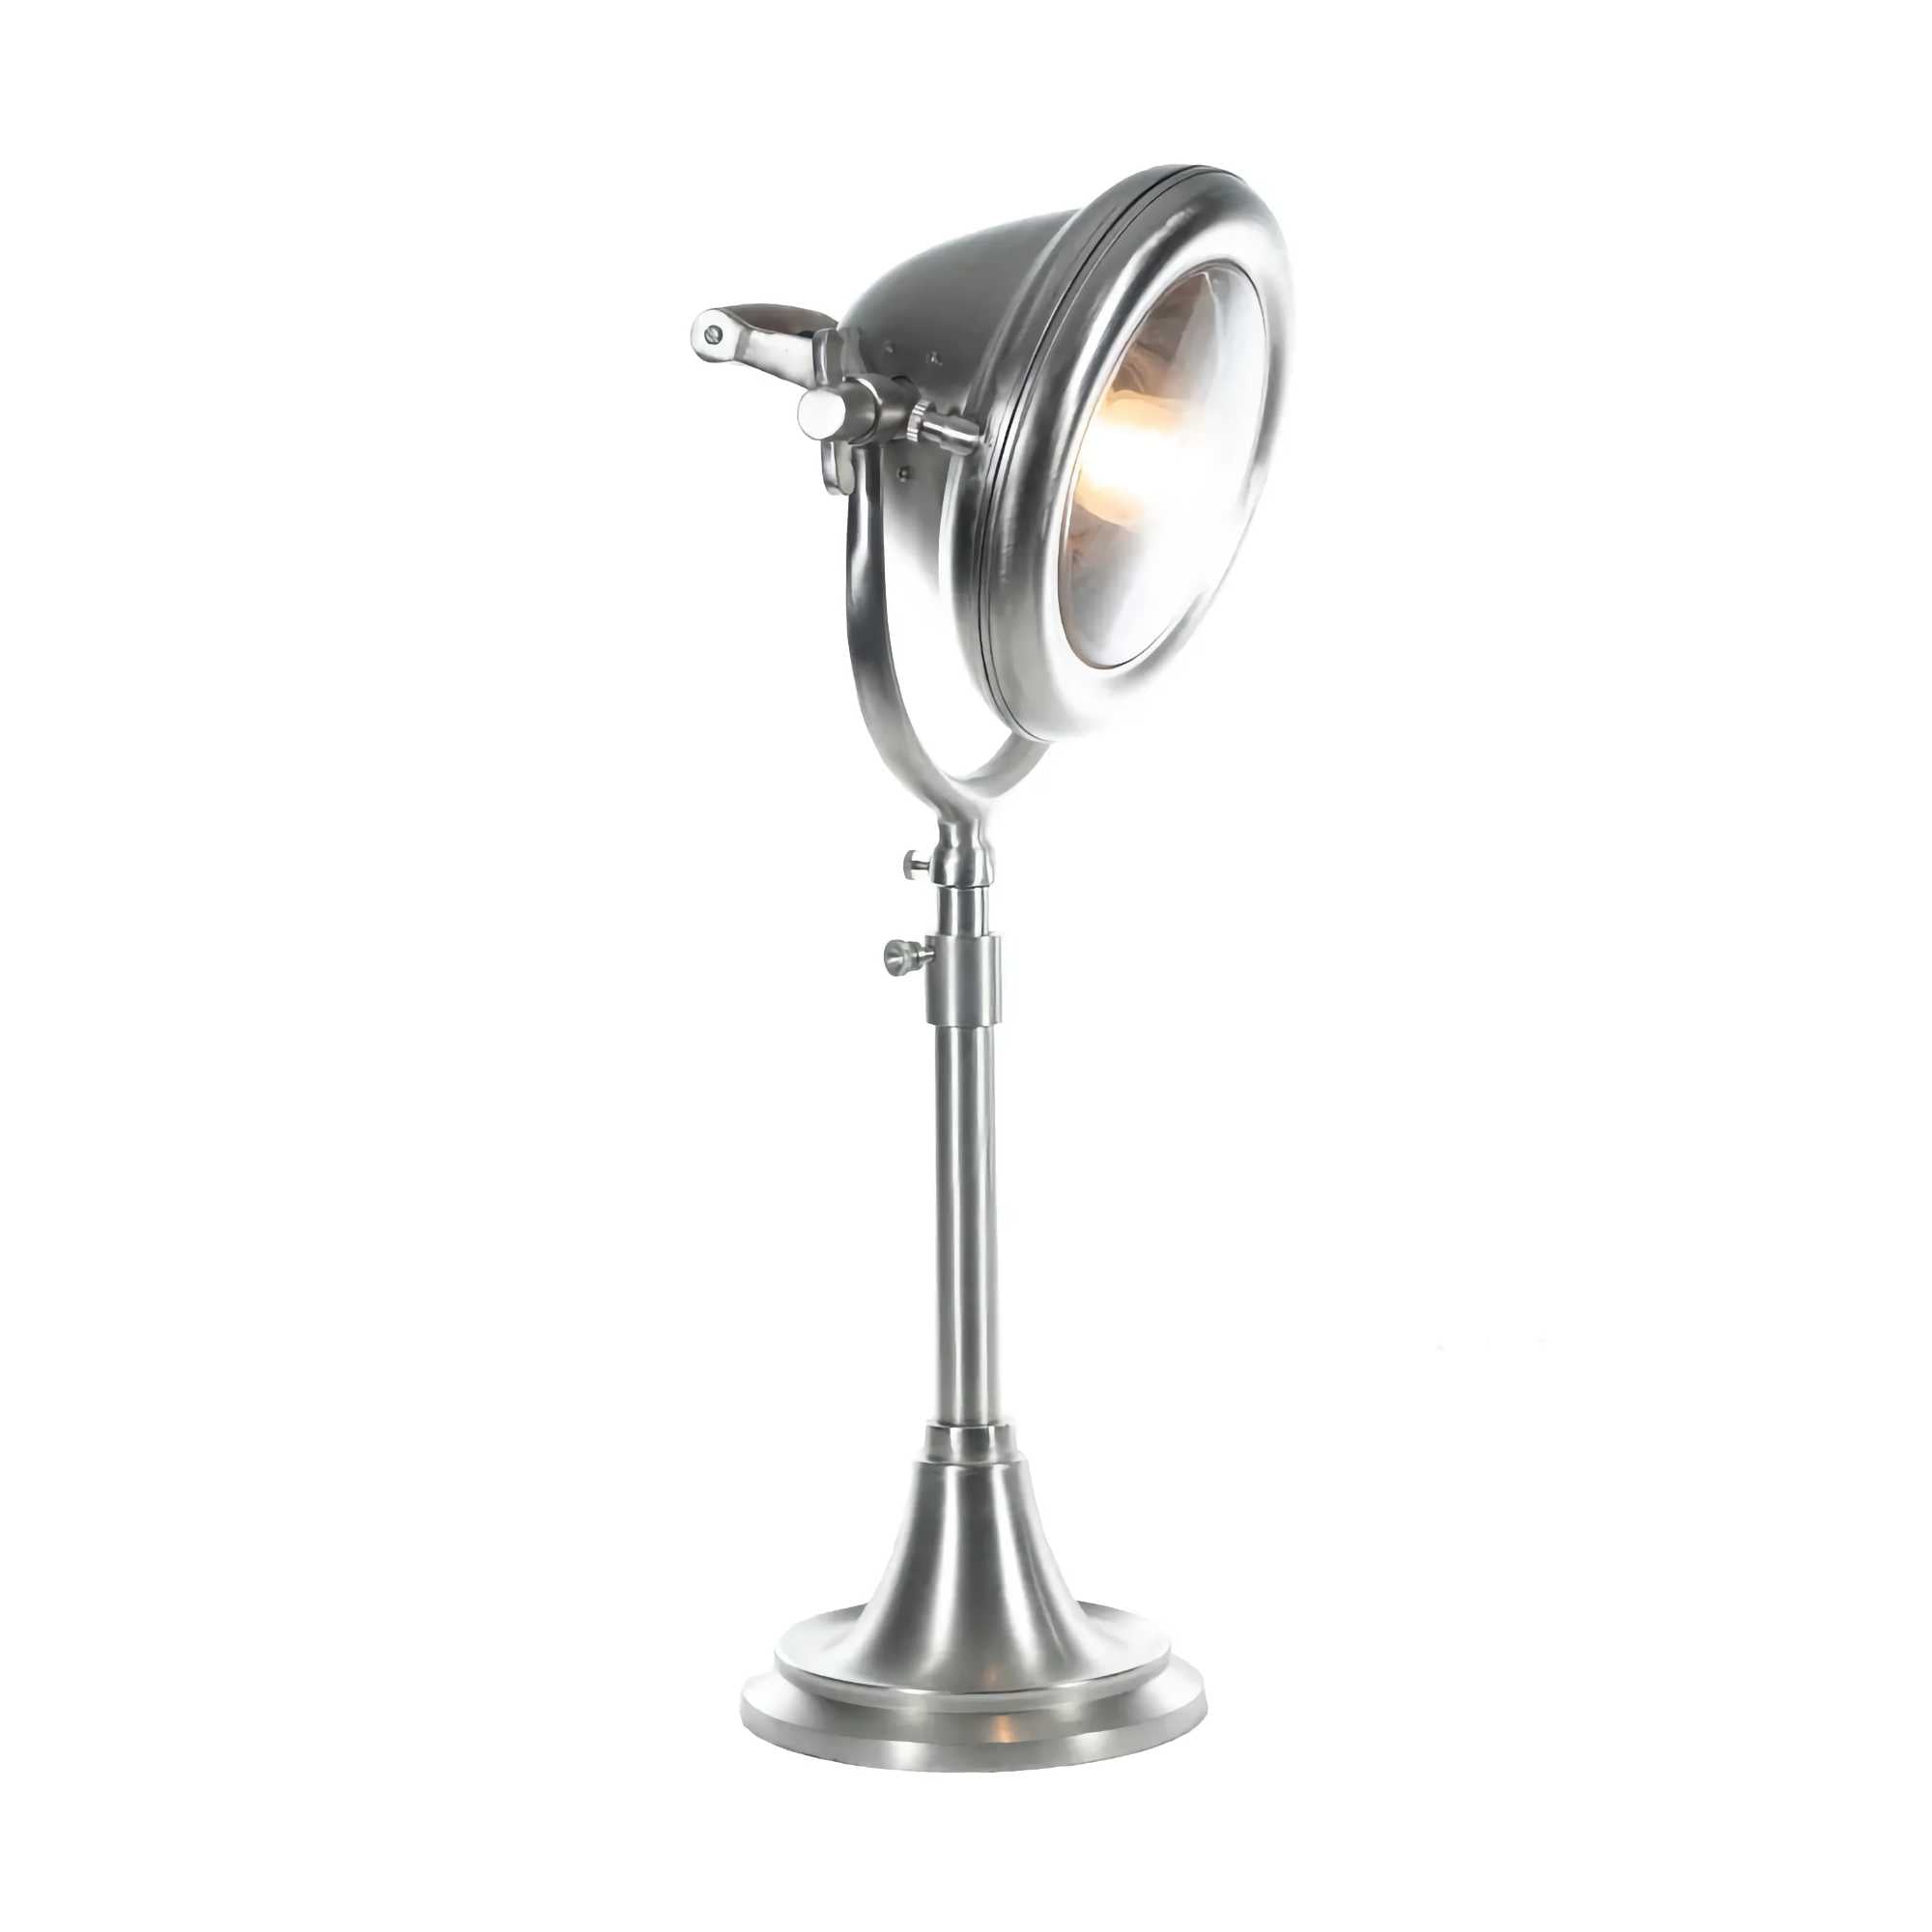 Ex-display | Authentic Models Ray Desk Lamp